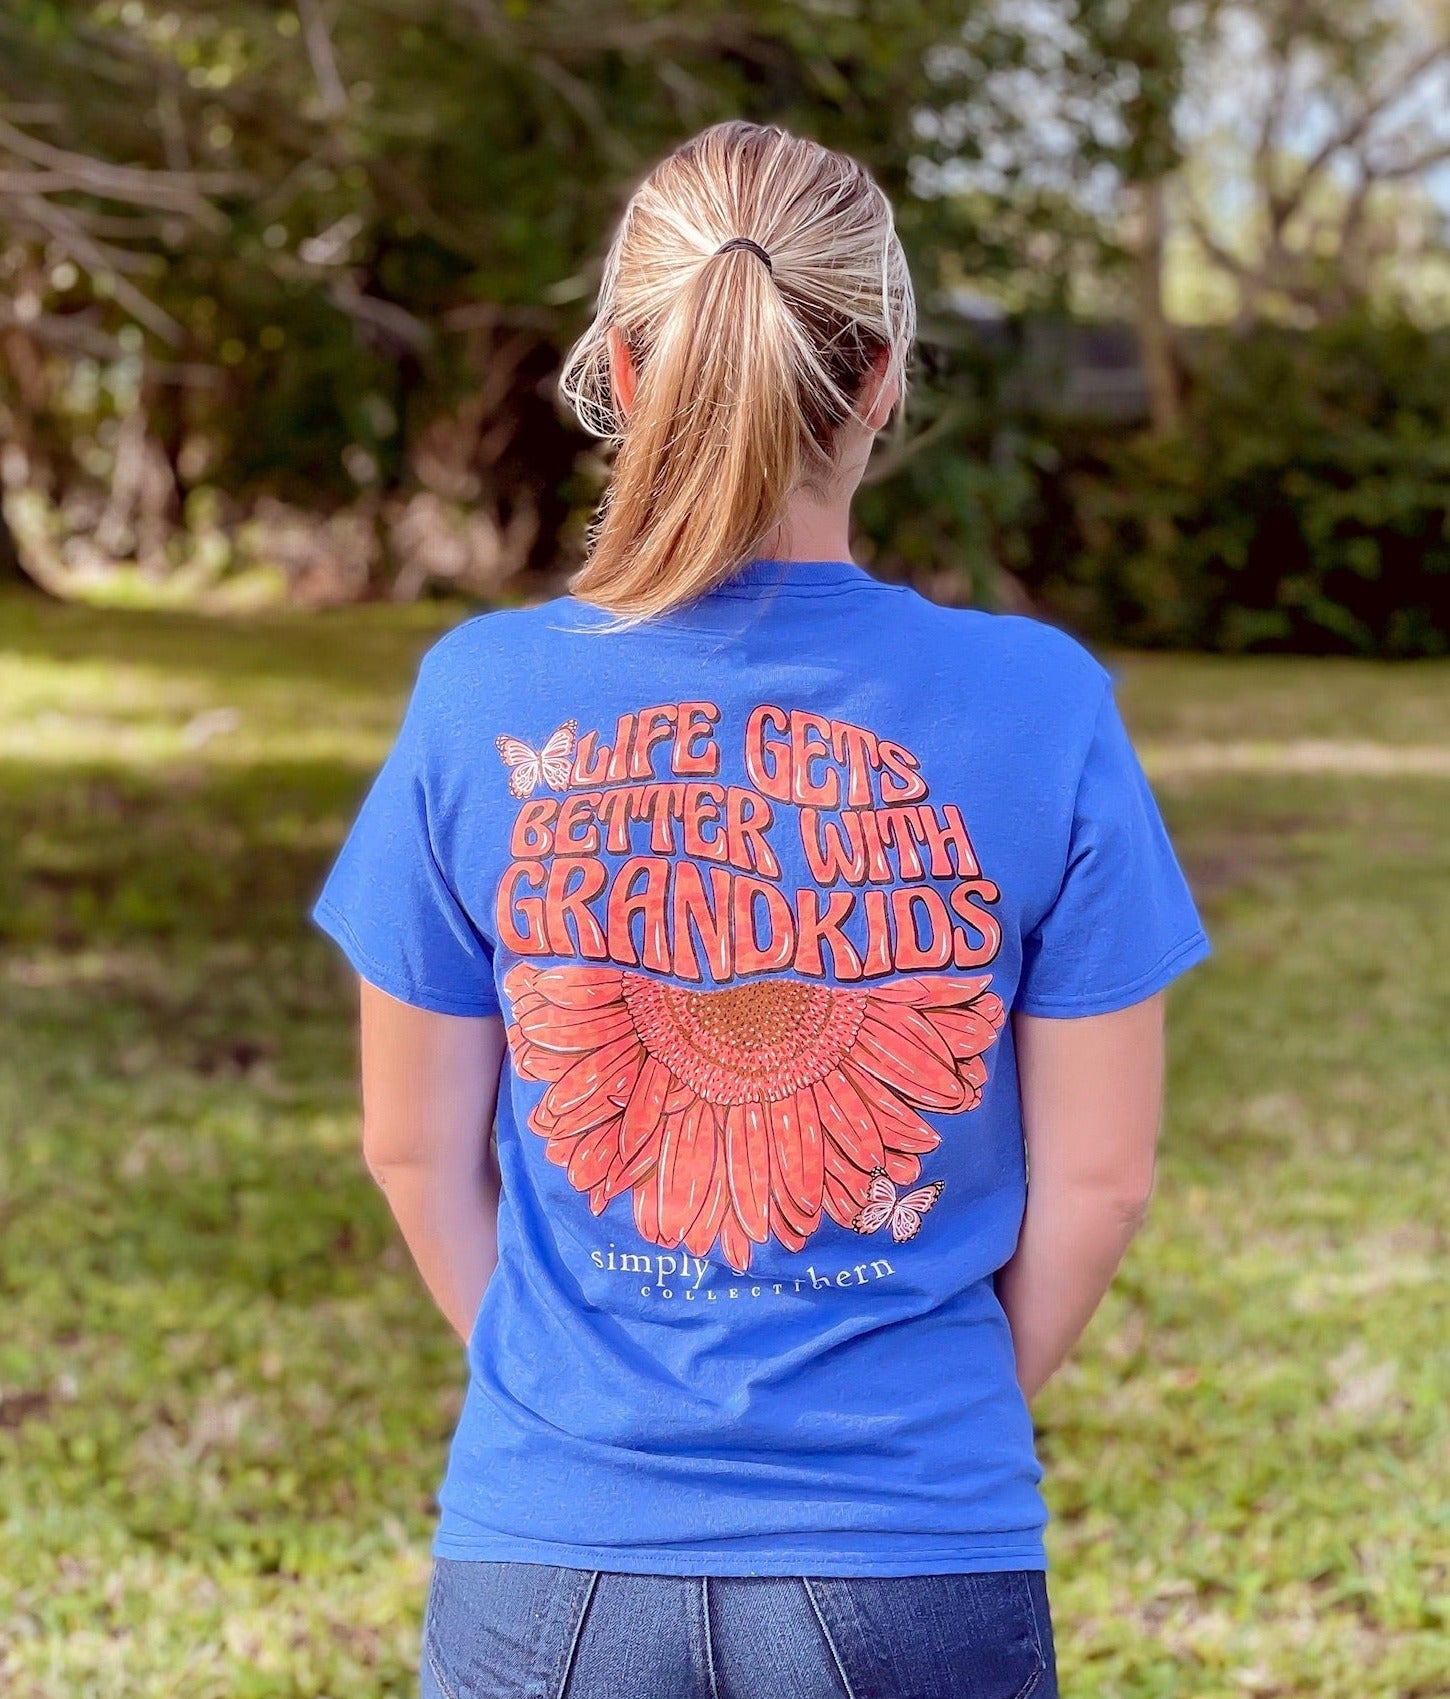 'Life Gets Better With Grandkids' Short Sleeve Tee by Simply Southern